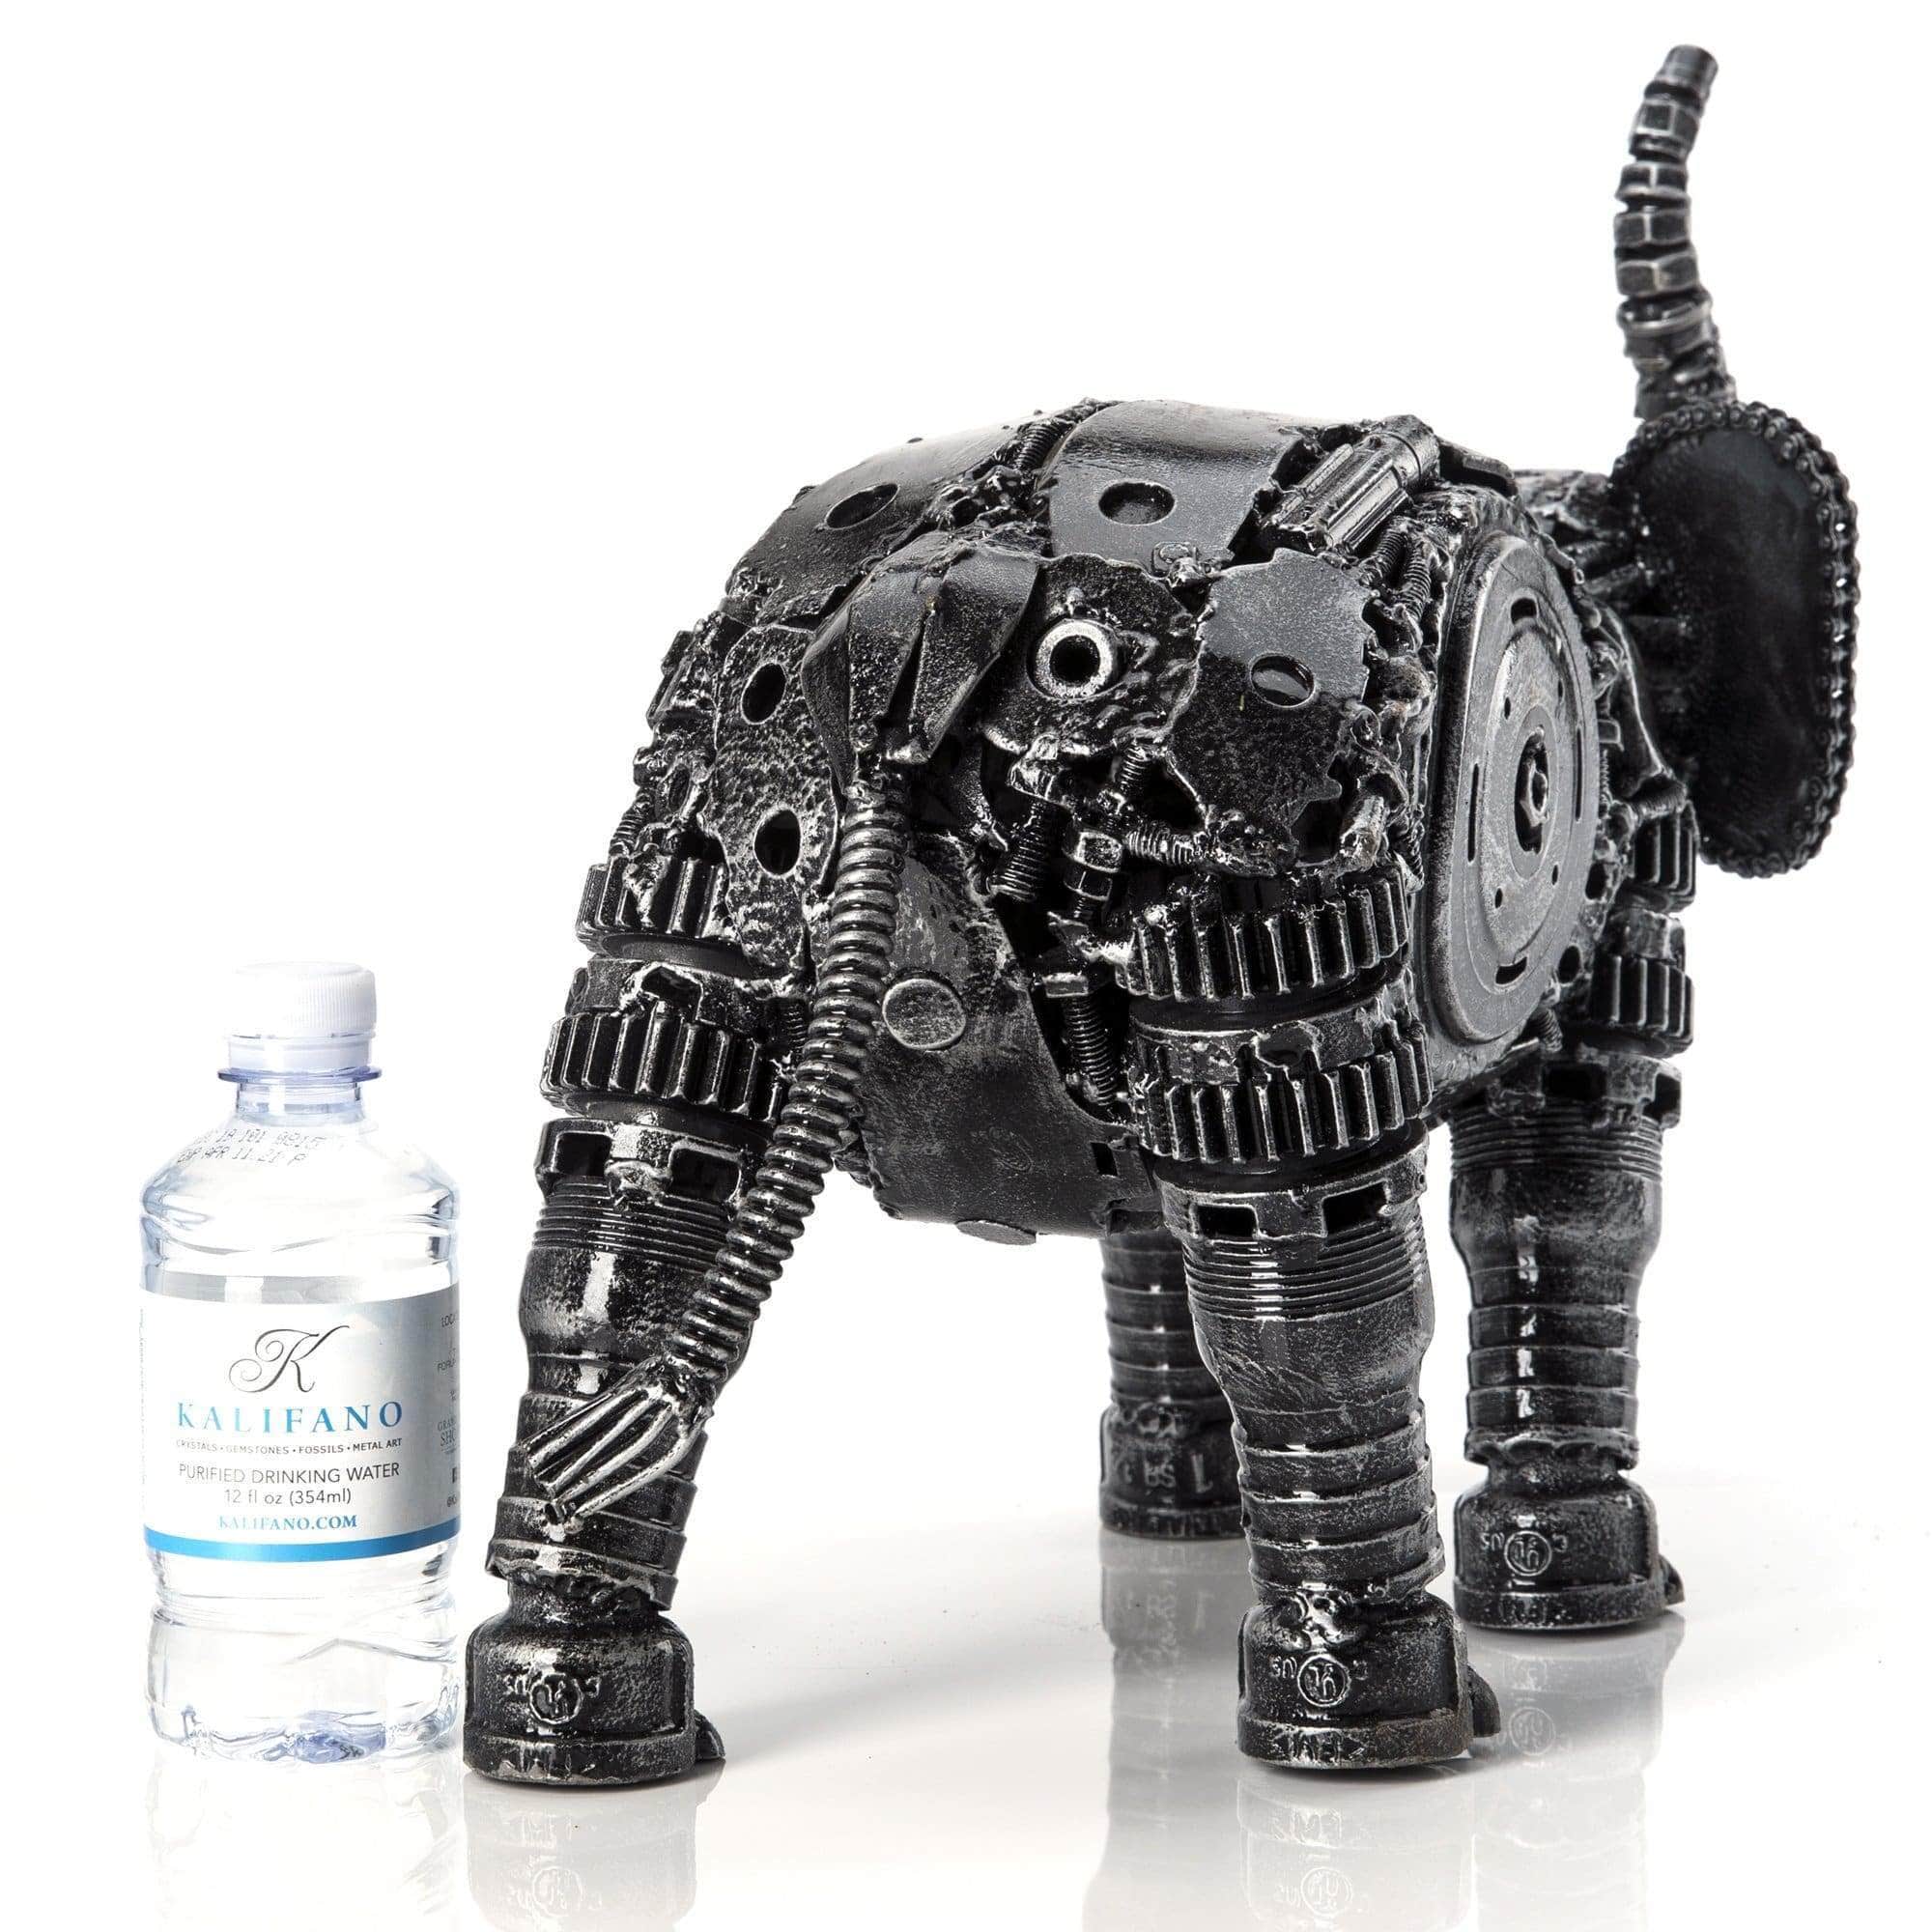 Kalifano Recycled Metal Art Elephant Silver Inspired Recycled Metal Sculpture Original, One-of-a-Kind Work of Art RMS-2500ES-N